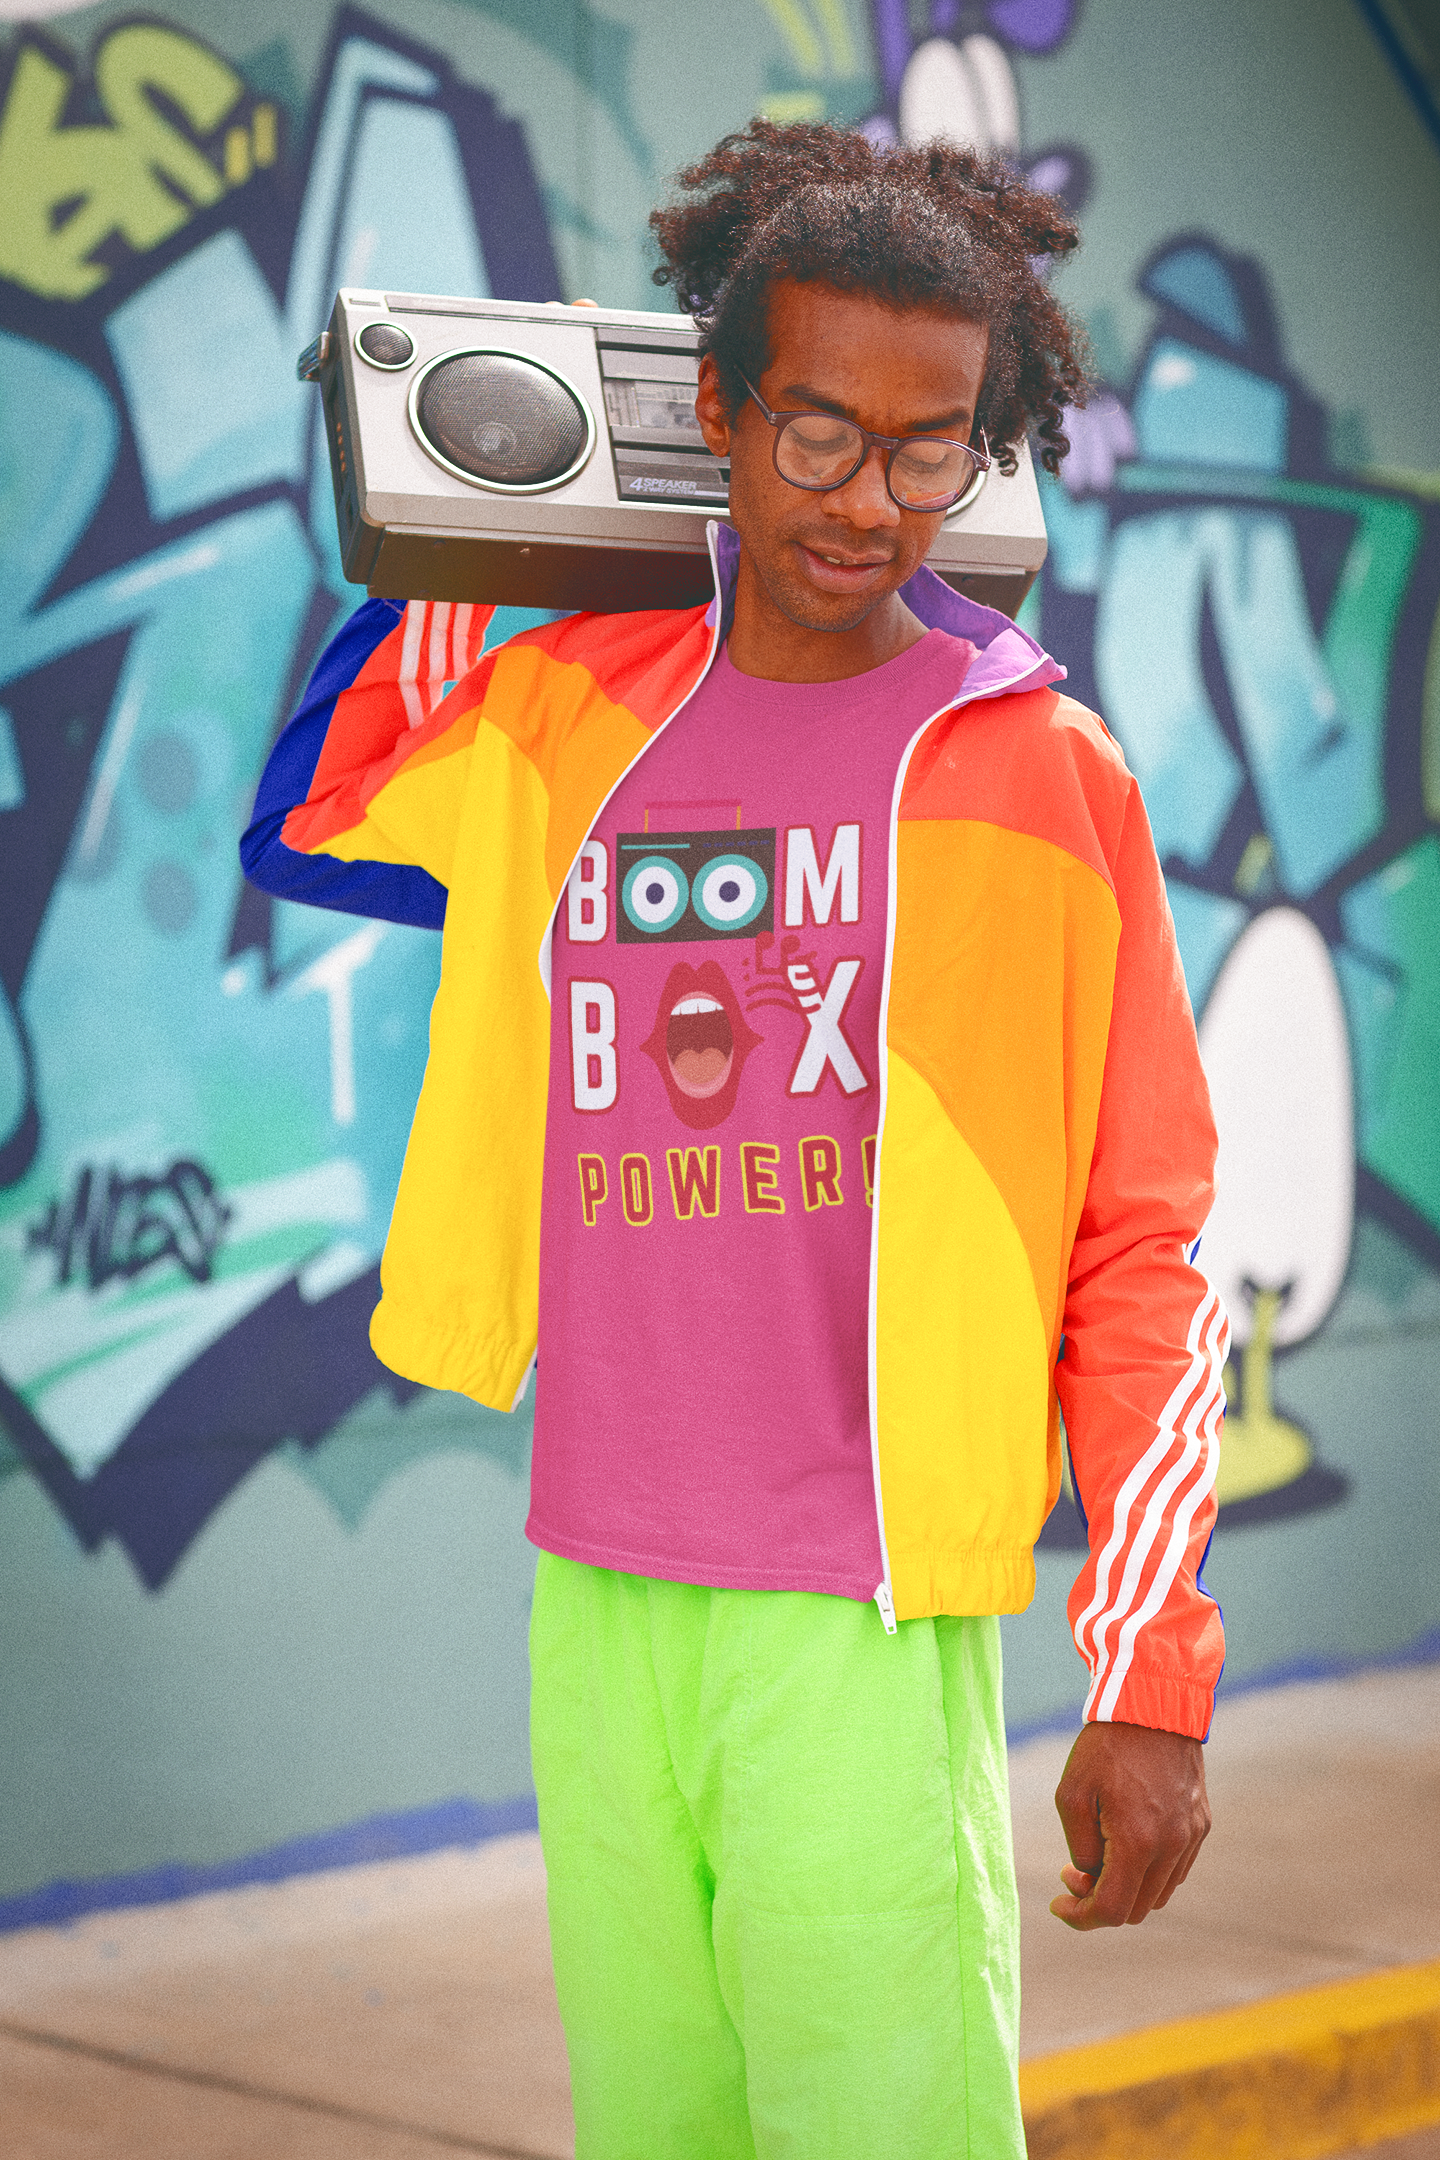 A man wearing a heliconia T-Shirt says BOOM BOX POWER! A boombox, the speakers make the Os in the word BOOM, a mouth indicating its singing as the O in BOX